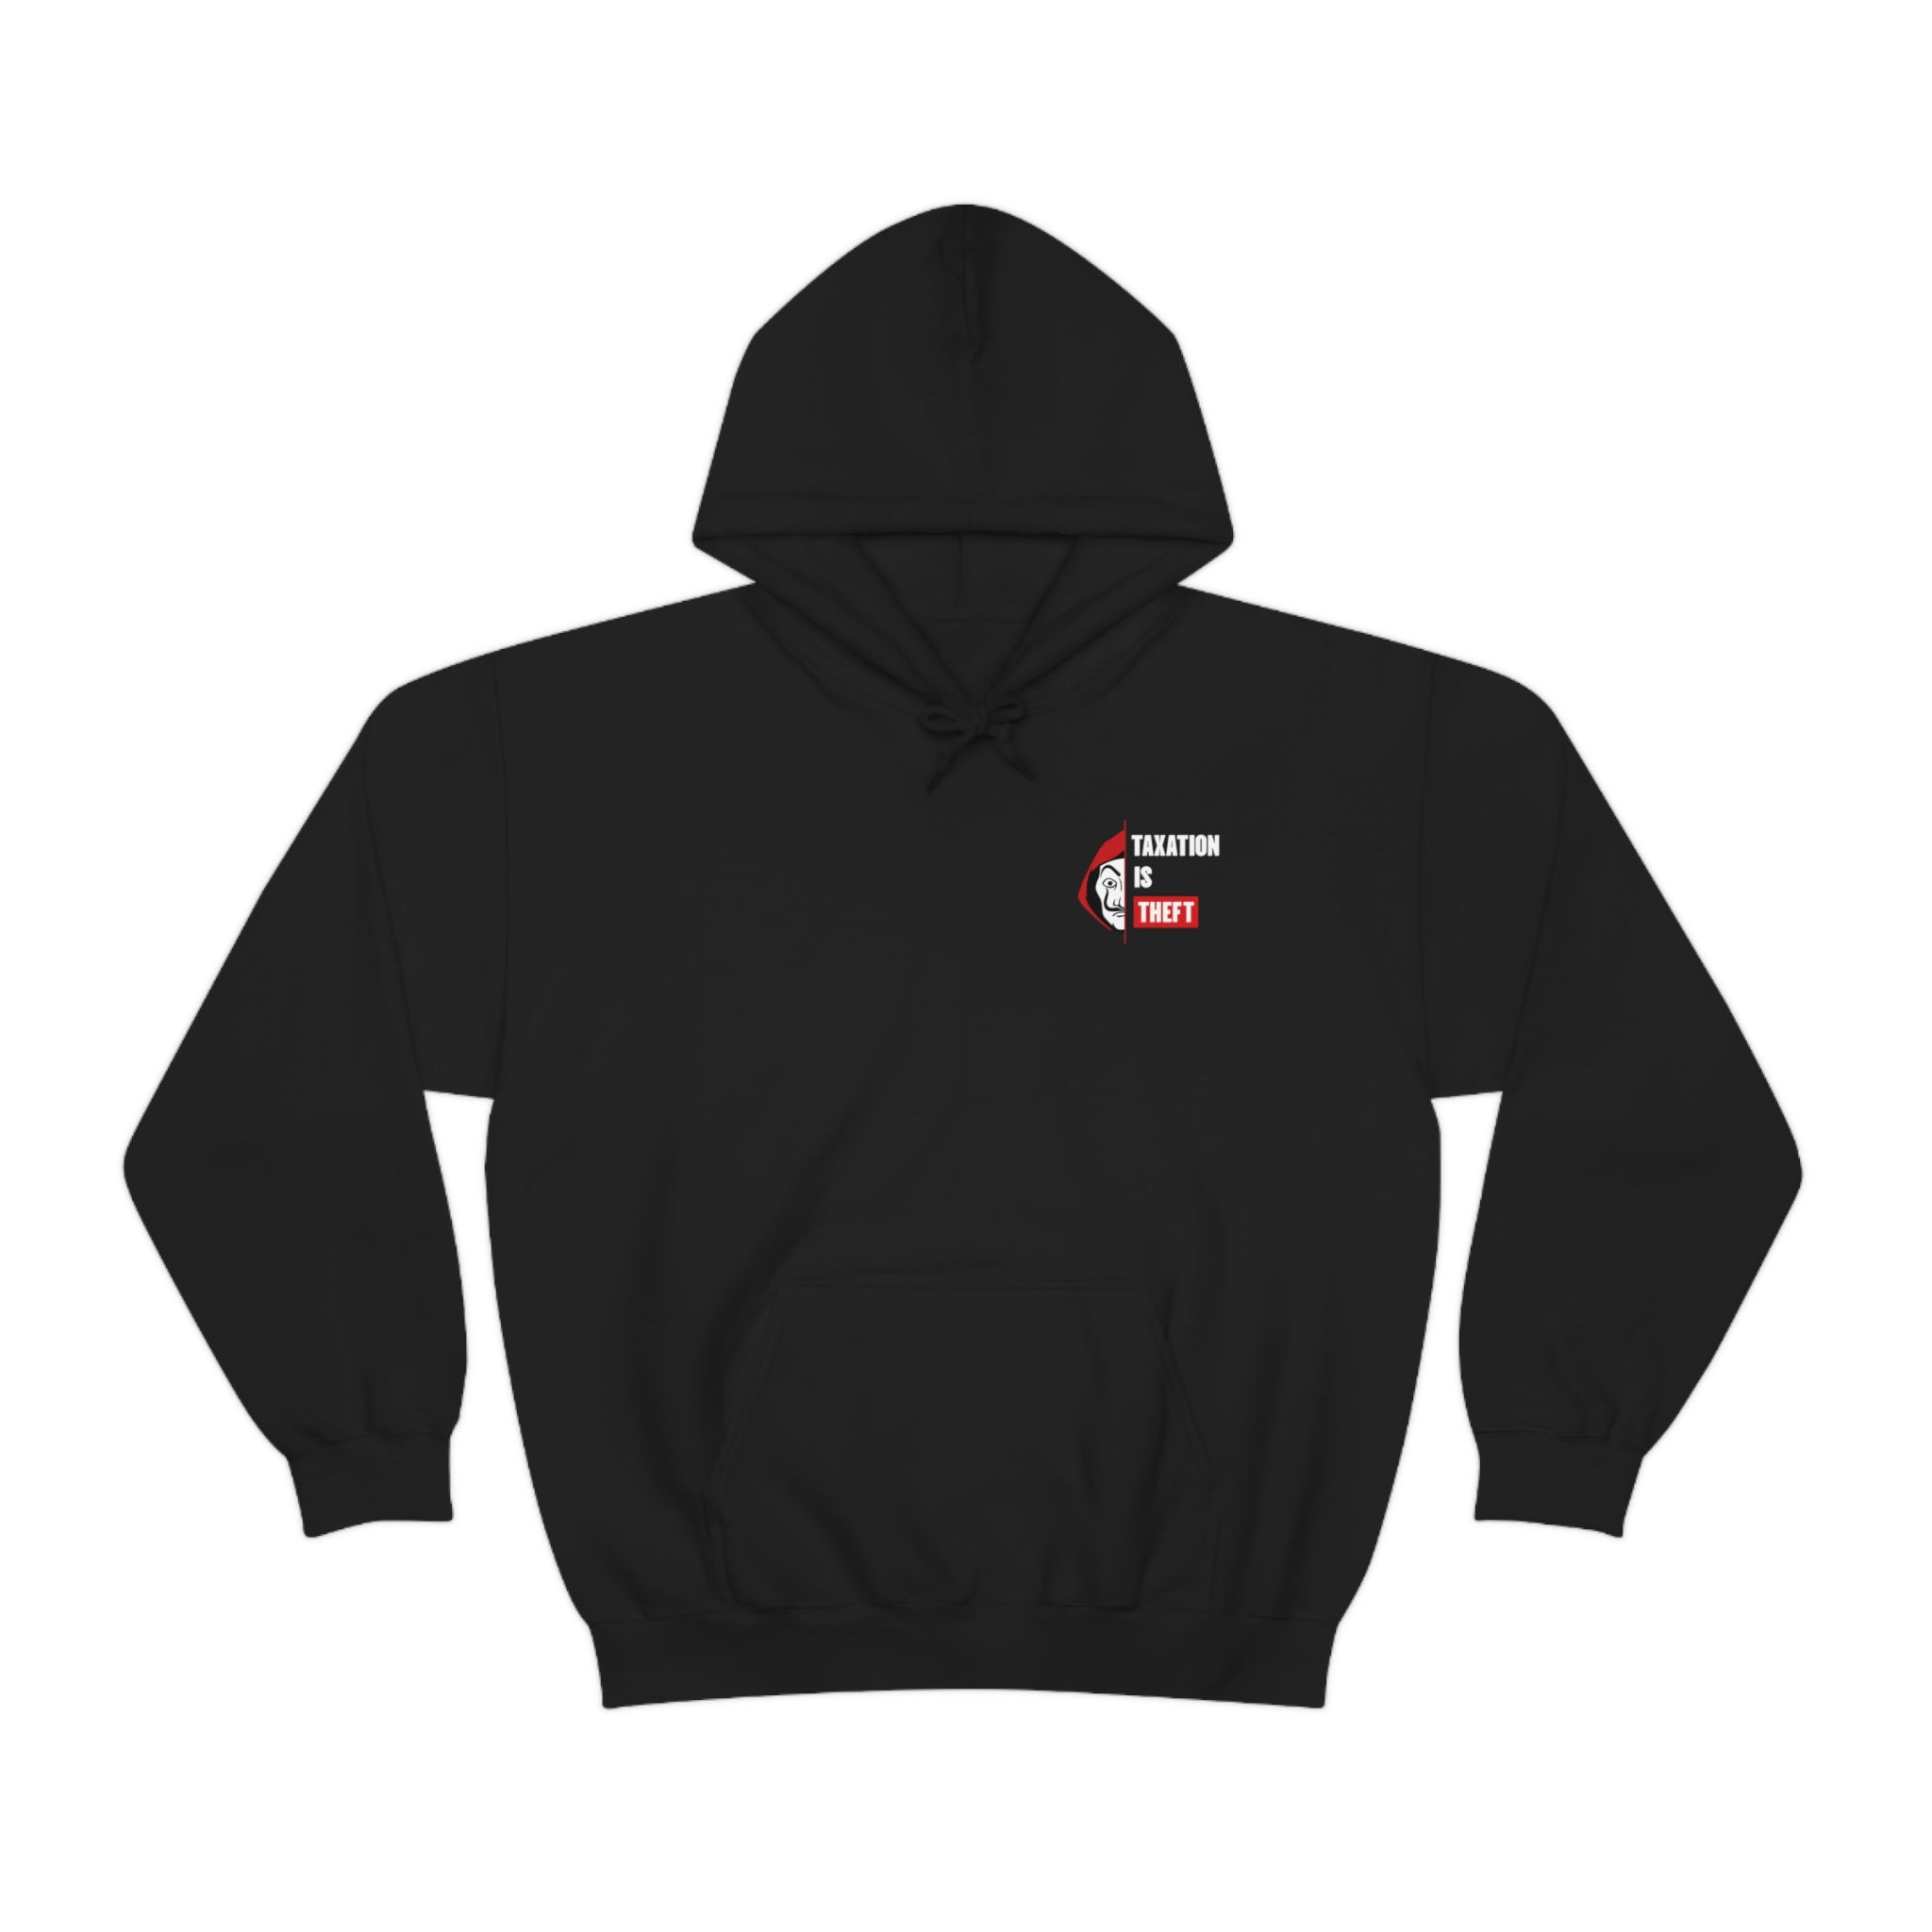 Taxation is Theft | Hoodie Front & Back